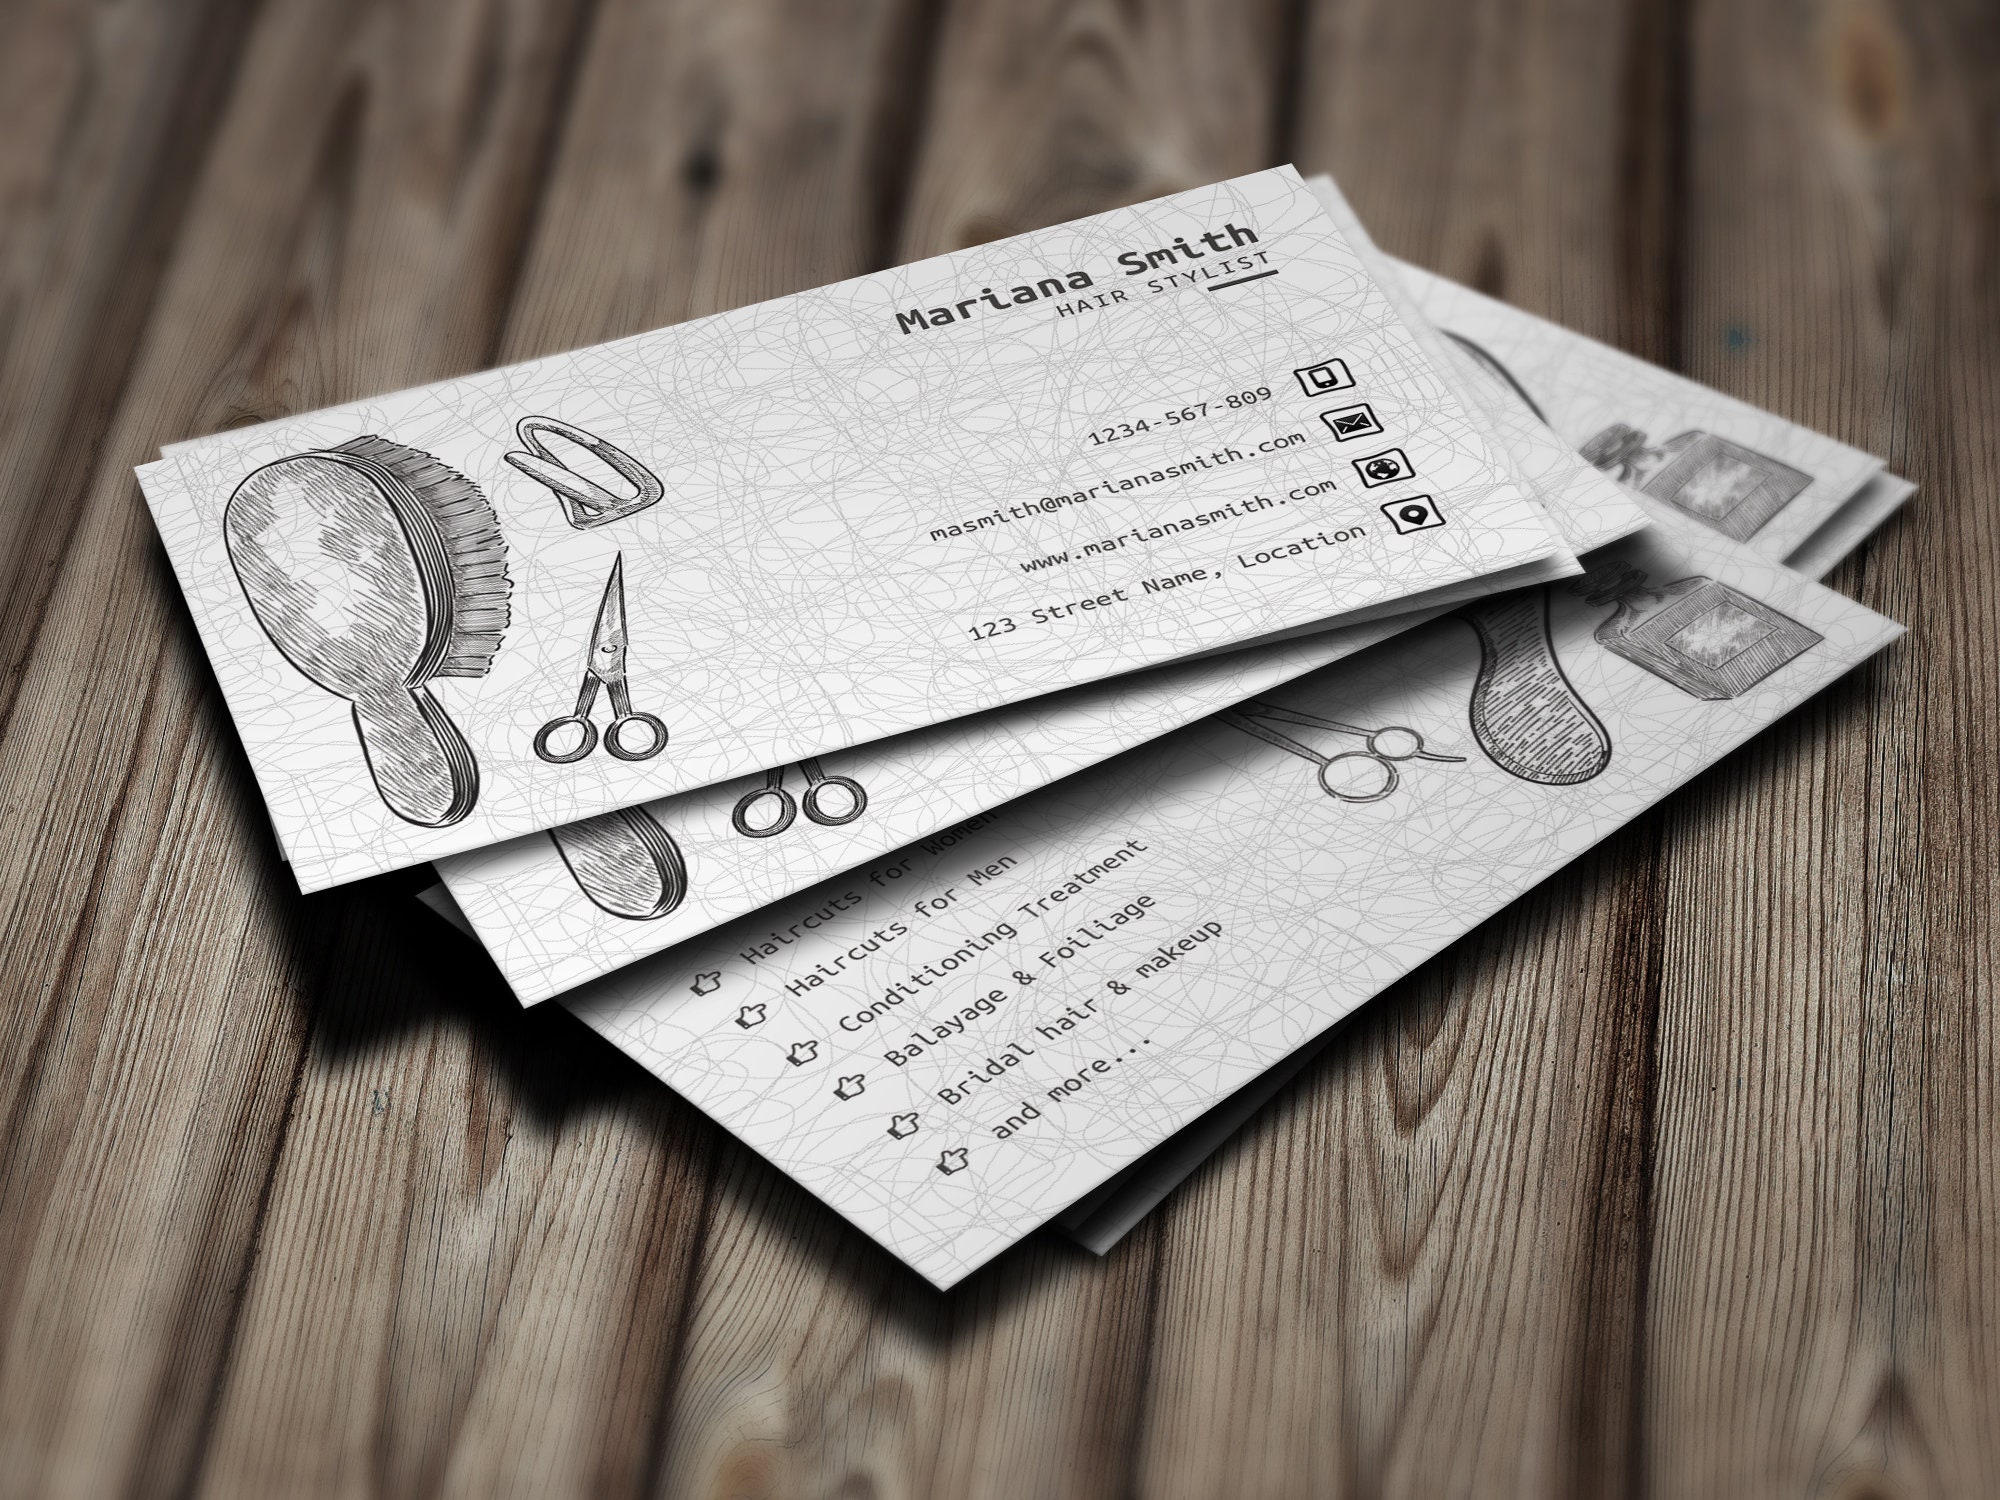 Hair Stylist Business Card Template Business Cards for - Etsy New Zealand